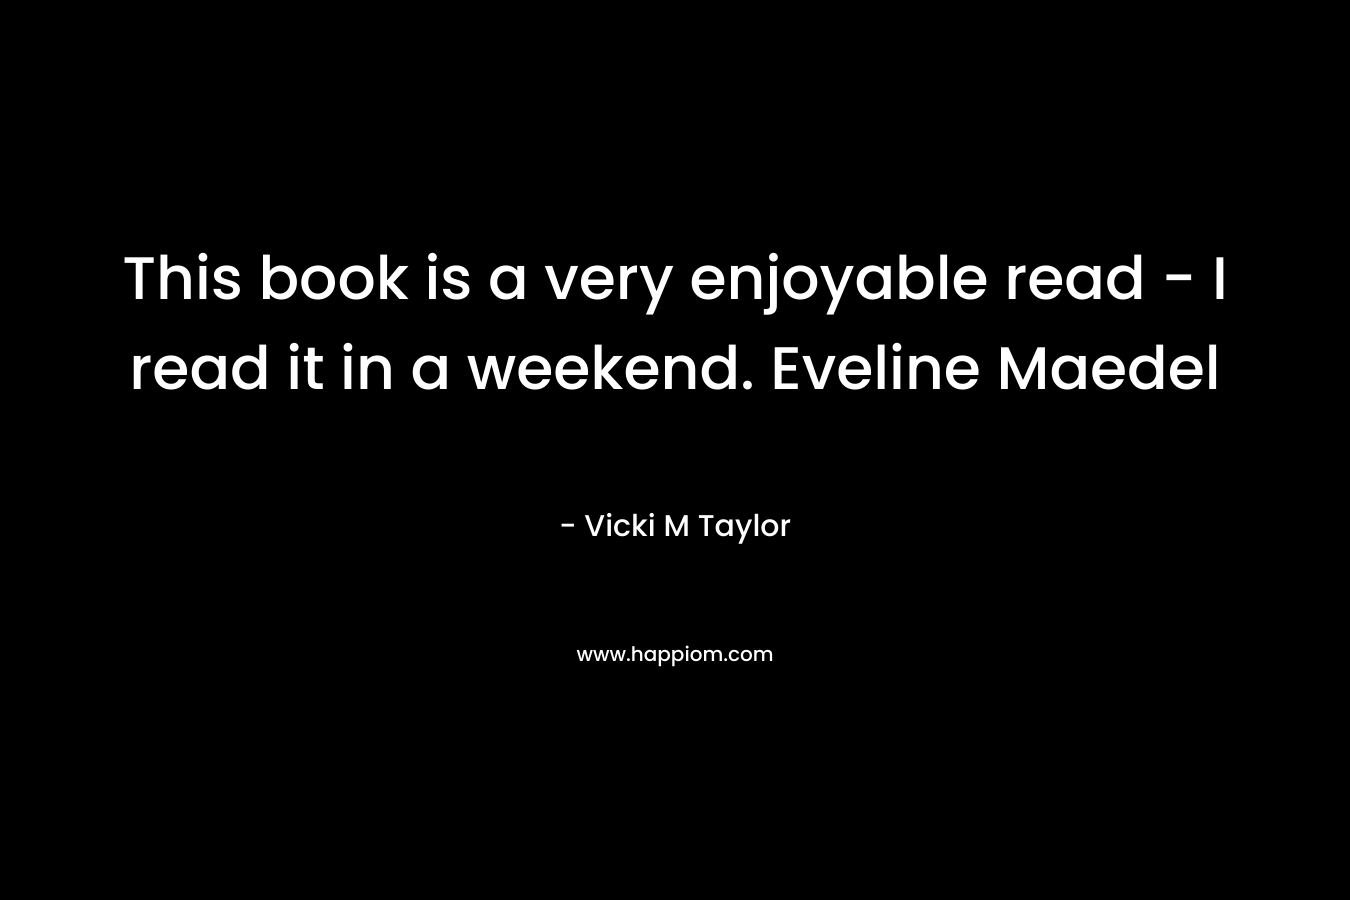 This book is a very enjoyable read - I read it in a weekend. Eveline Maedel